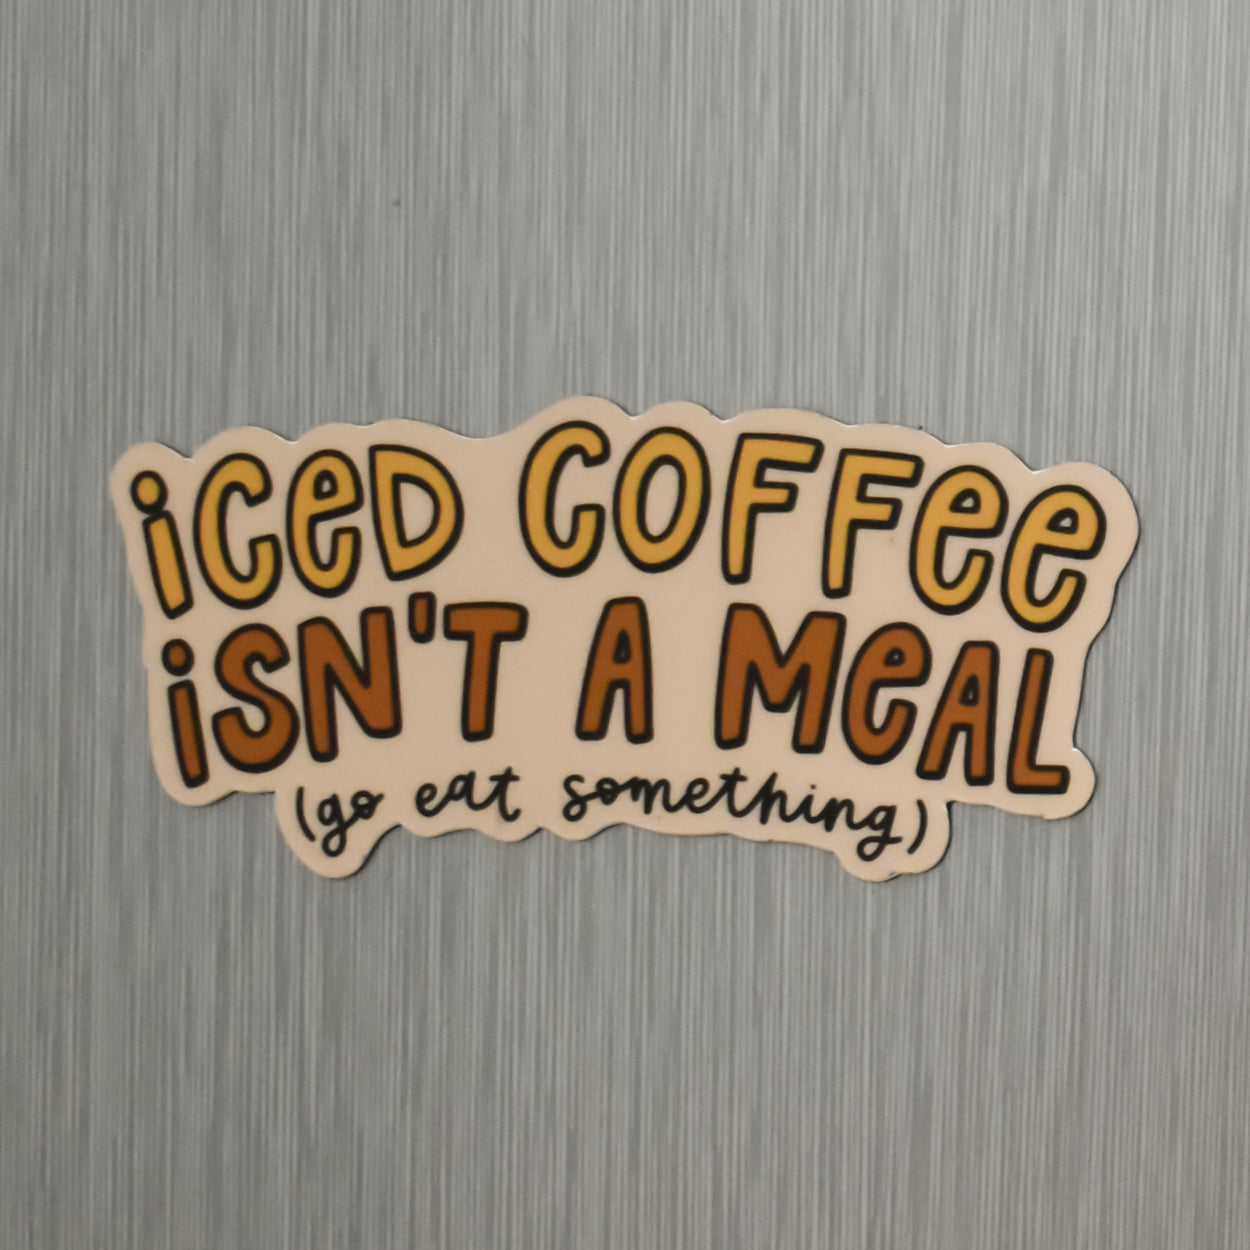 Iced Coffee Isn't A Meal Magnet